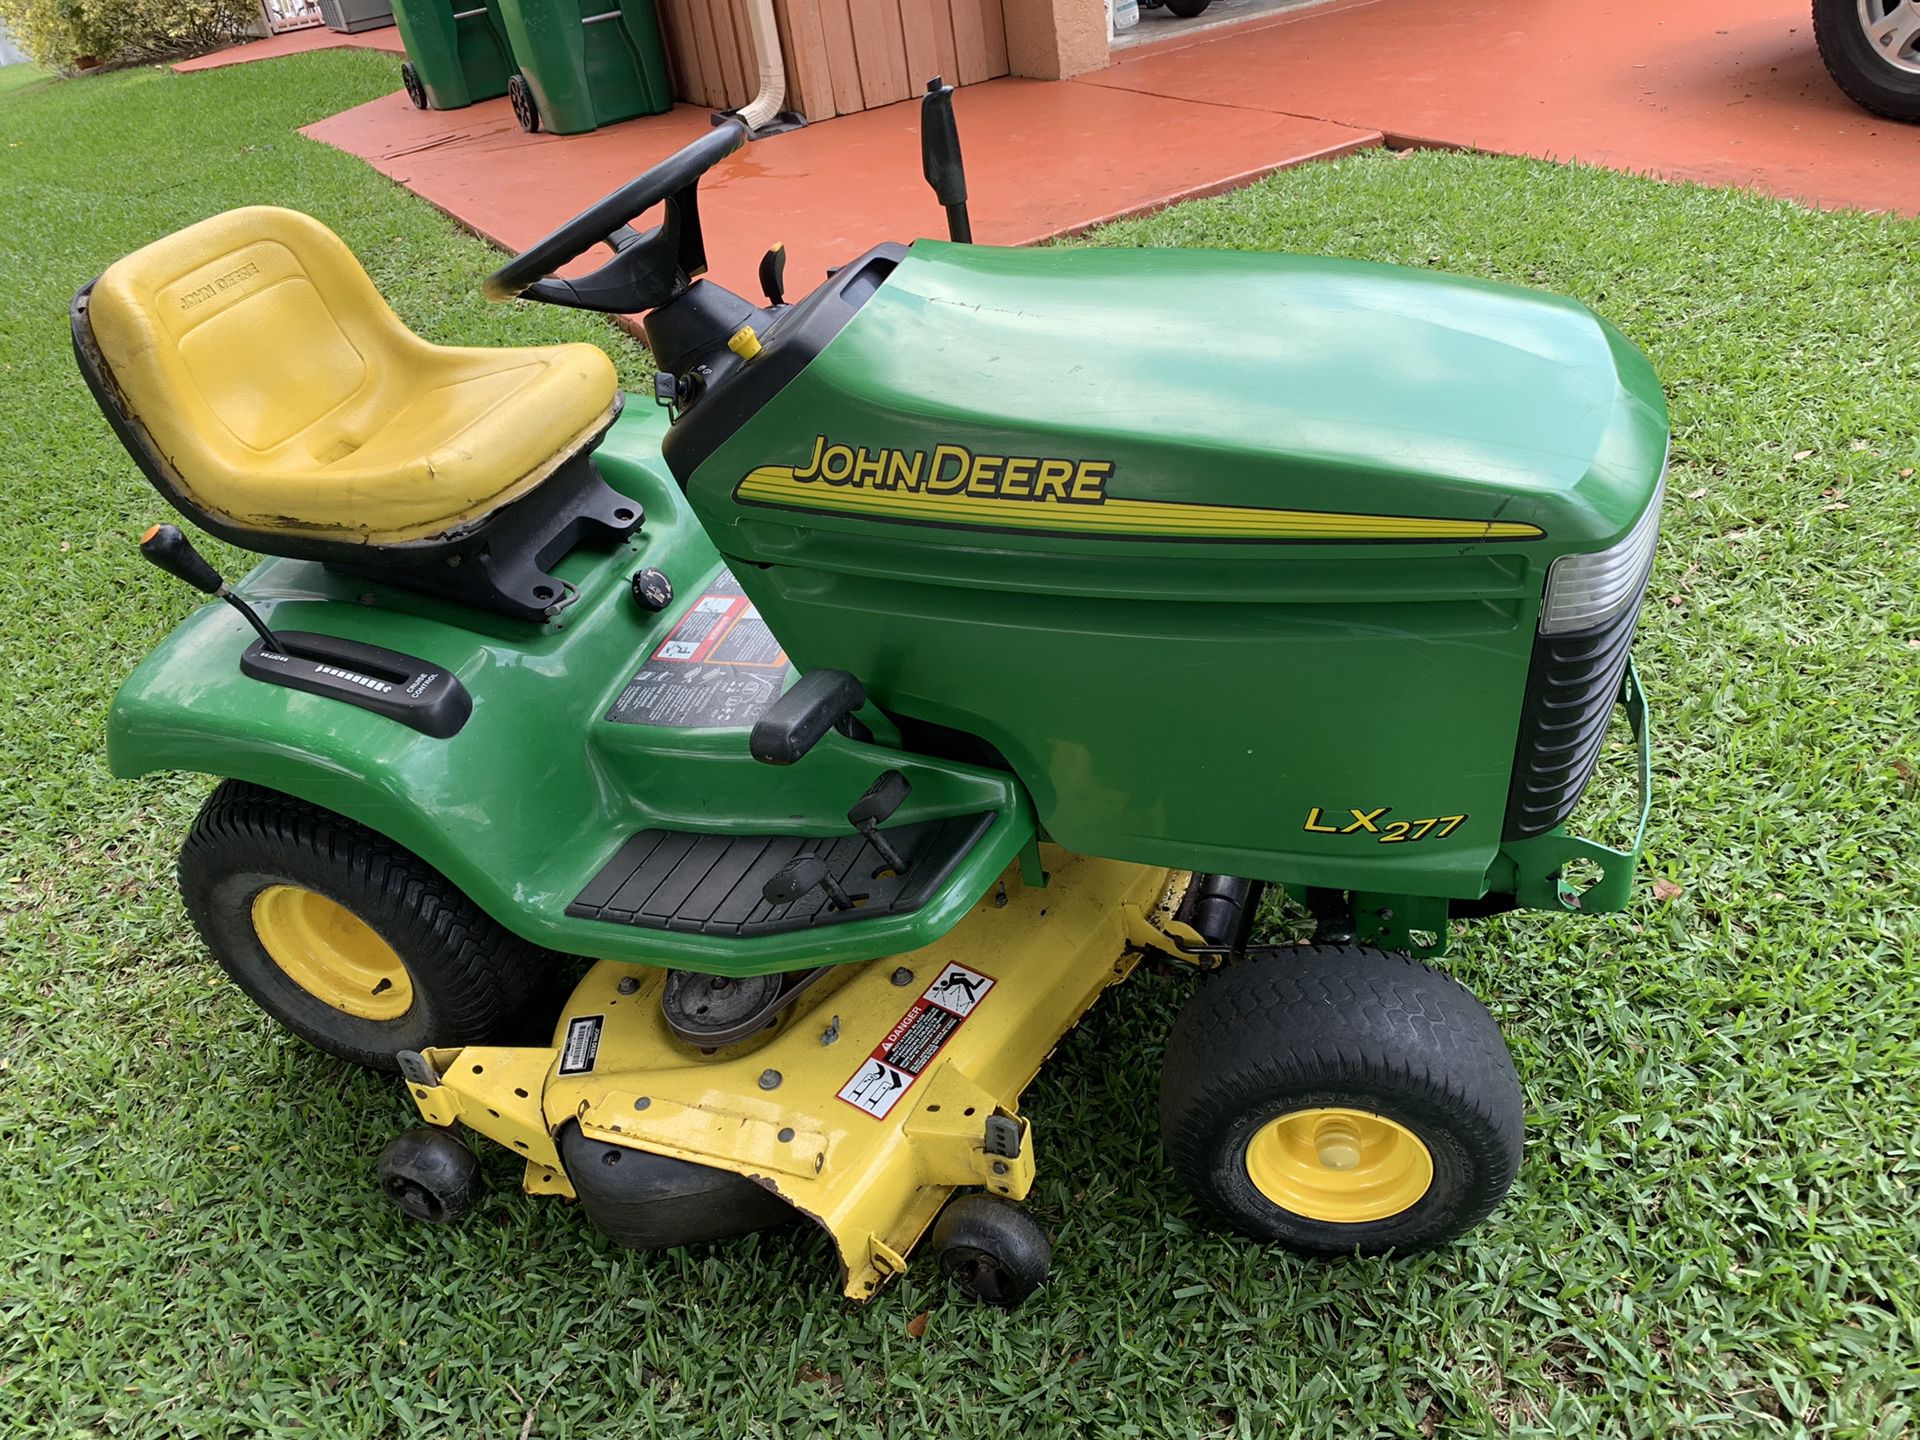 John Deere LX277 lawn mower / tractor with 48” cutting deck or D100 with 42 inch deck for $700